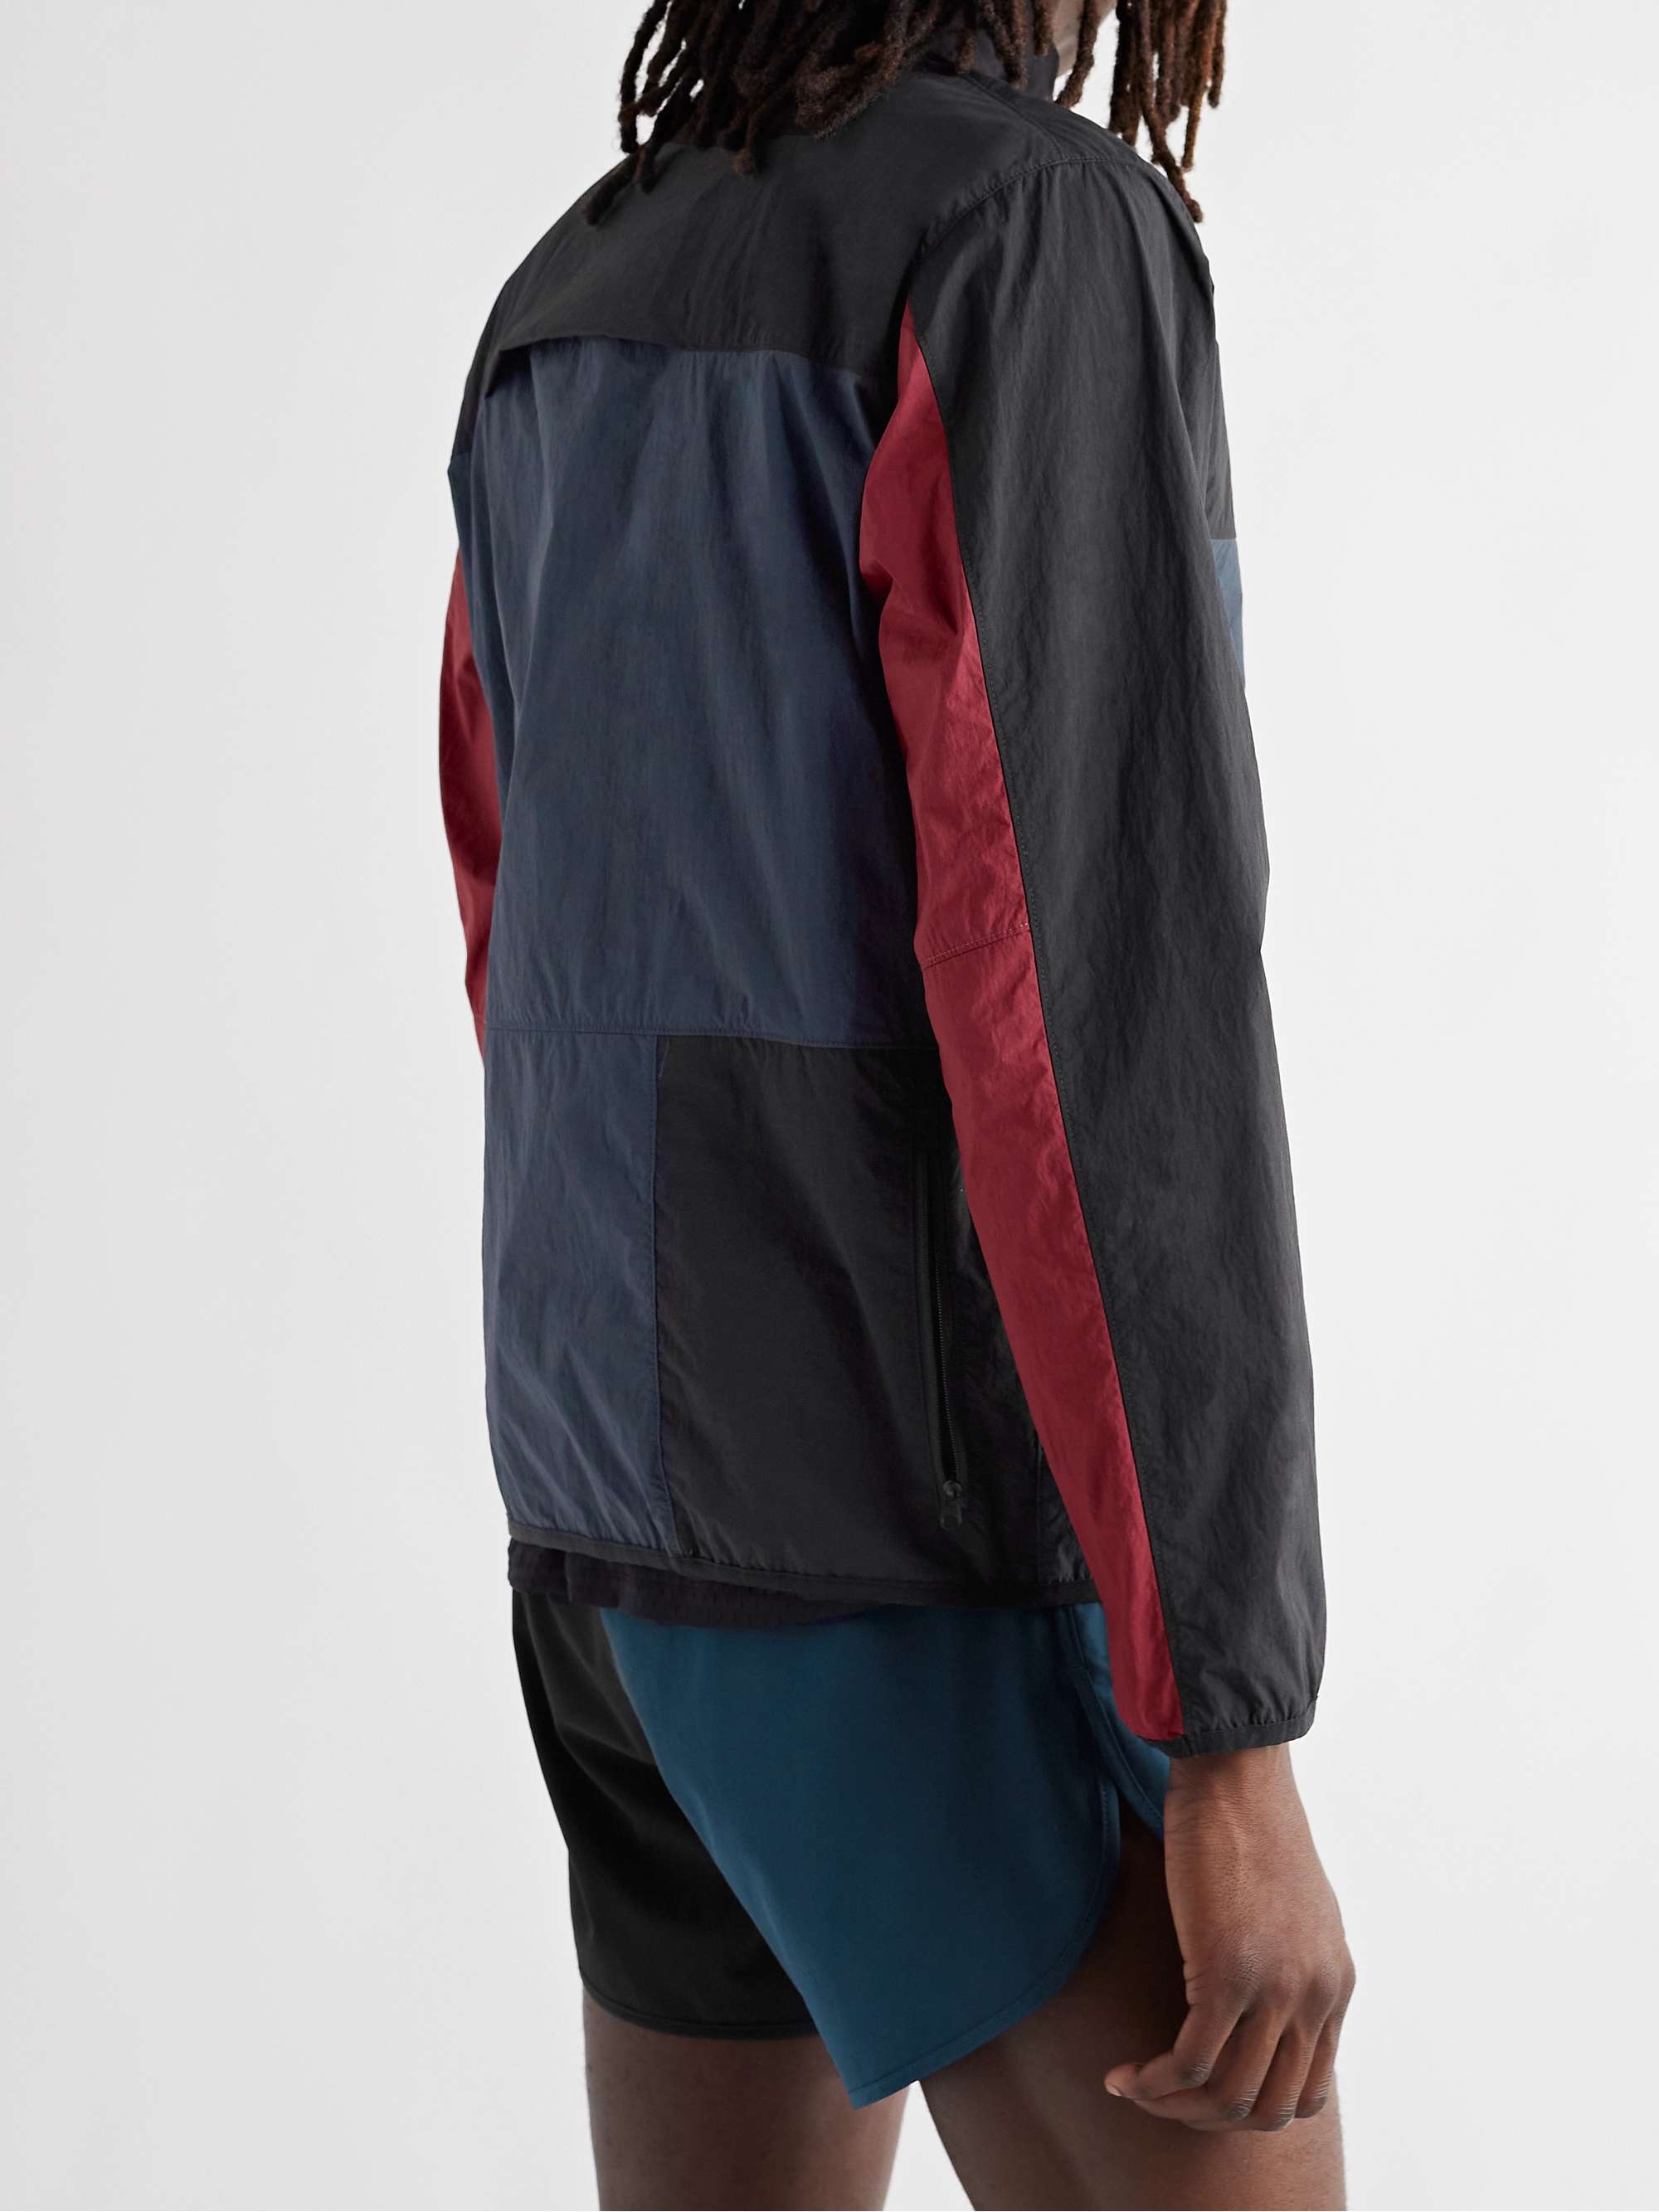 DISTRICT VISION + MR PORTER Health In Mind Theo Colour-Block Shell Half-Zip Jacket